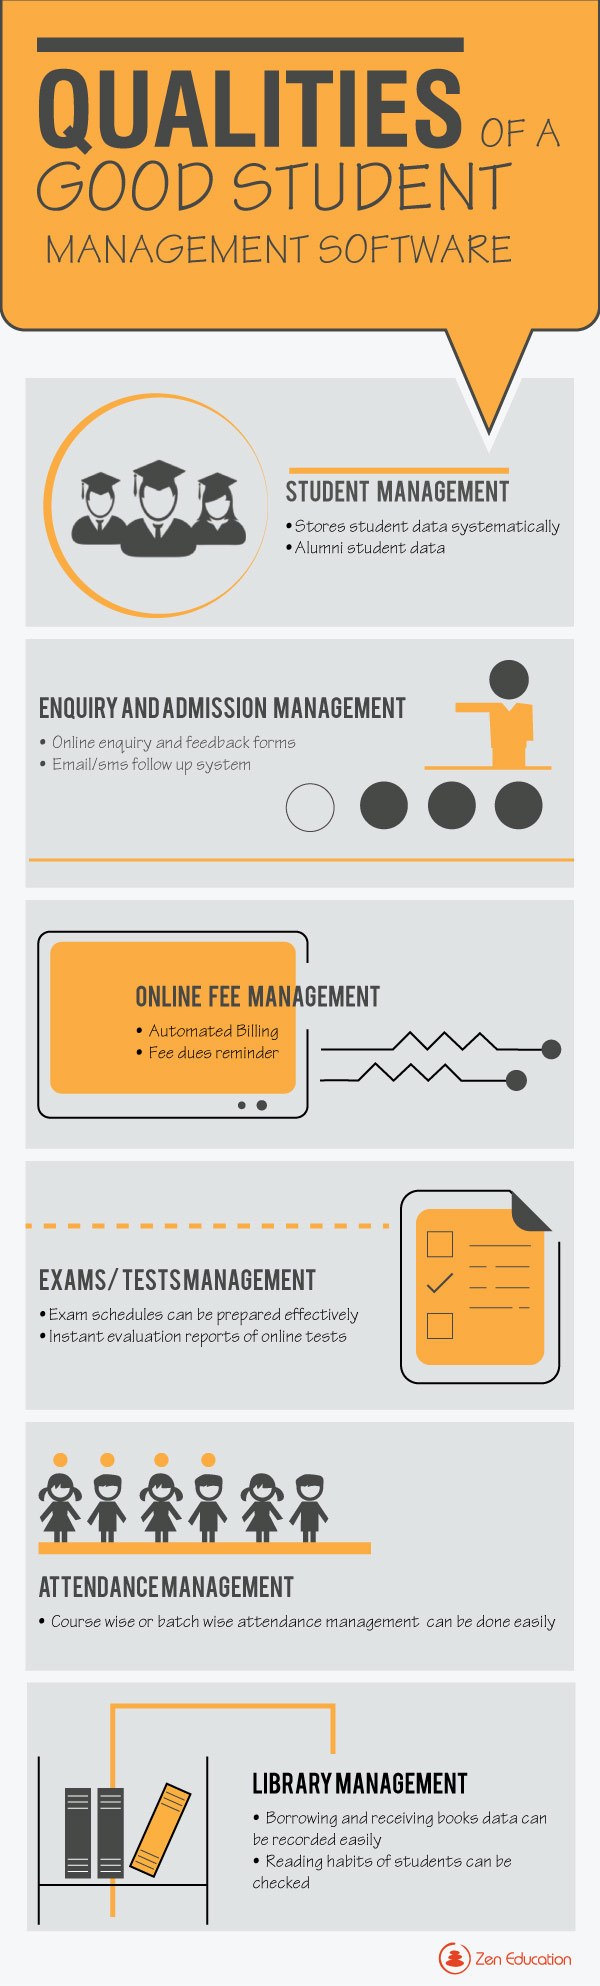 Qualities of a Good Student Management Software Infographic